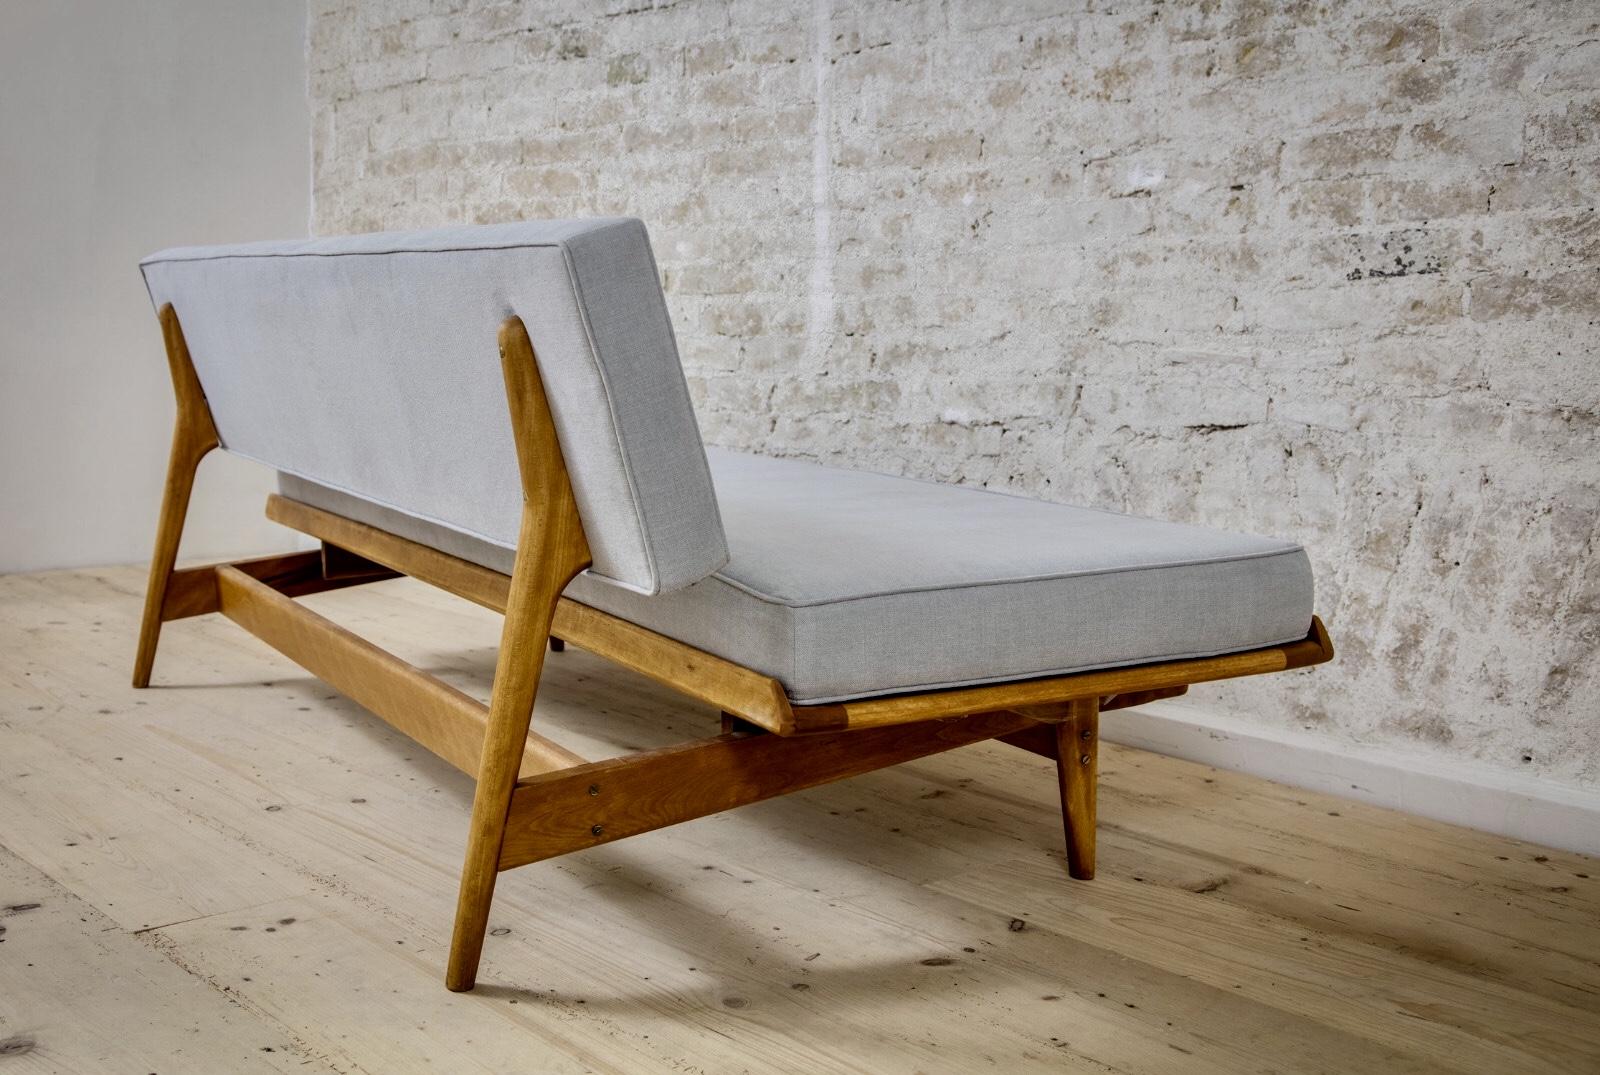 This elegant and rare daybed was designed by the Swedish Designer Karl-Erik Ekselius for Joc Sweden, fully restored. The frame of massive teak has an organic shaping. The upholstery was completely renewed and covered with a high quality cotton/linen